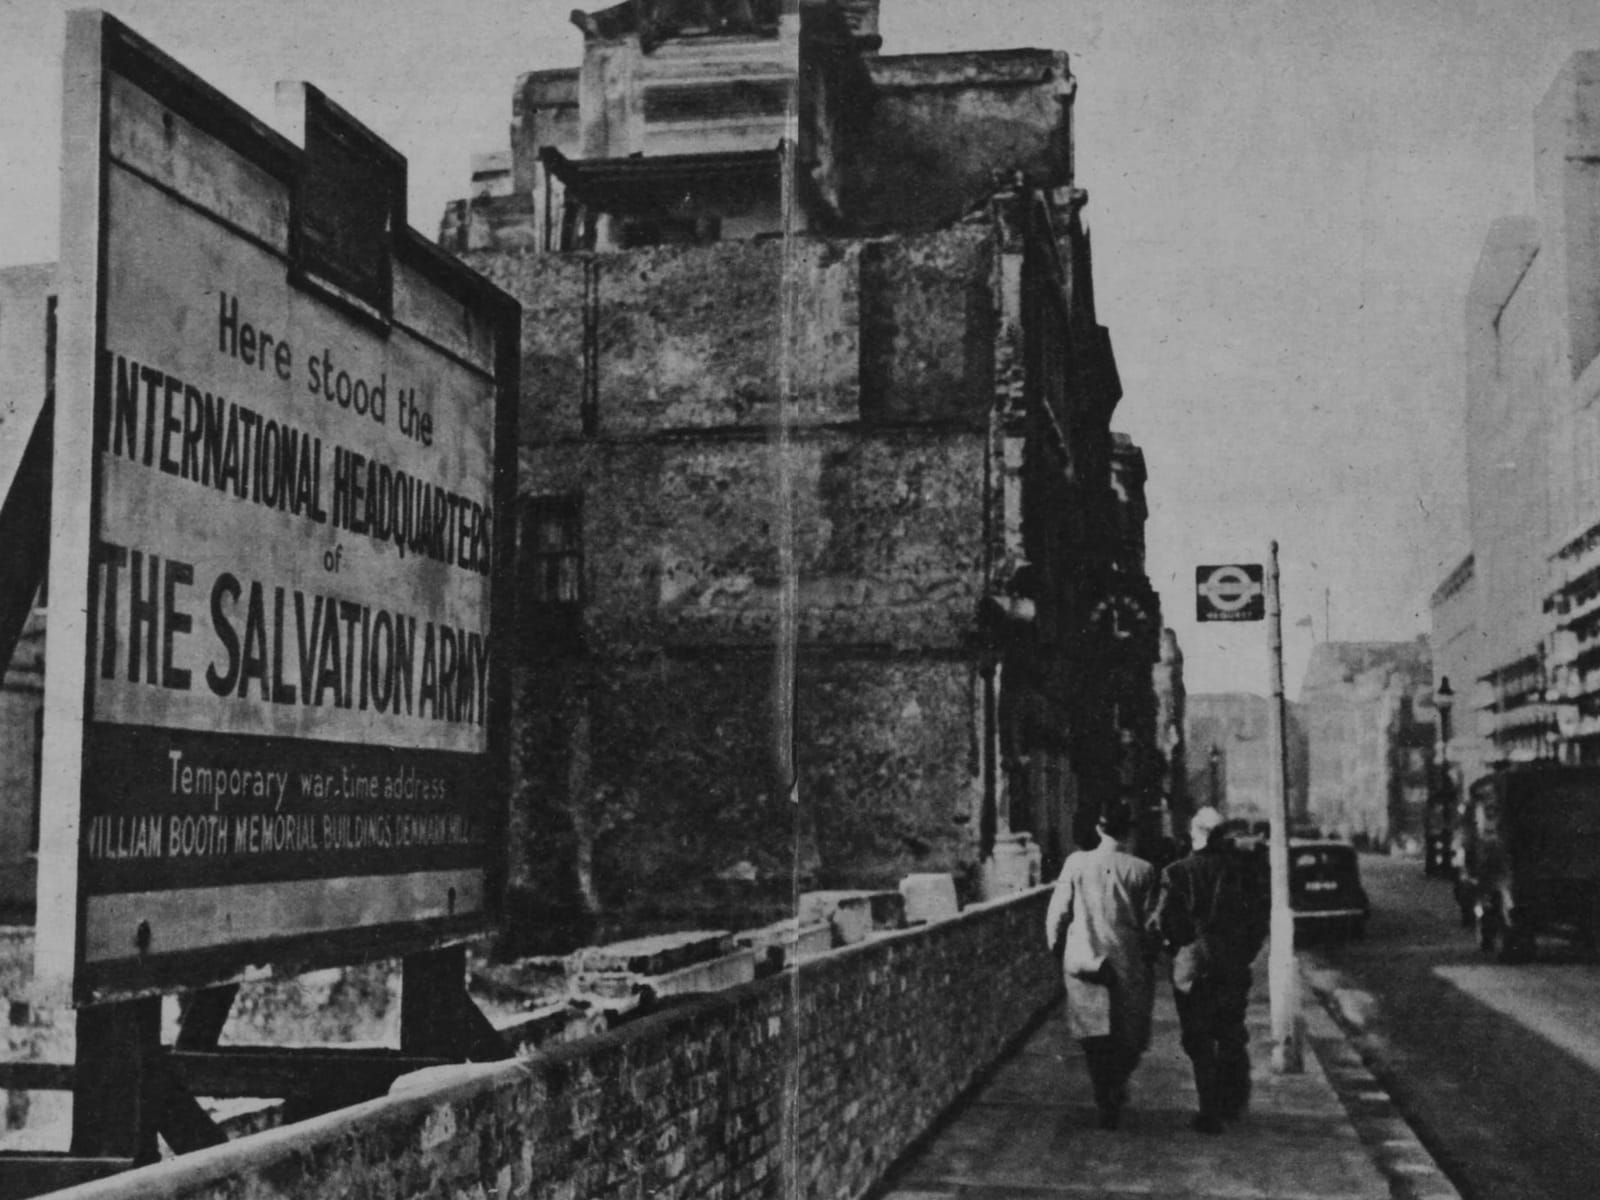 View down a London Street with most buildings still standing. To the left is an empty plot of land with a sign mounted in front reading, "Here stood the international headquarters of The Salvation Army. Temporary war-time address: William Booth Memorial Buildings, Denmark Hill."